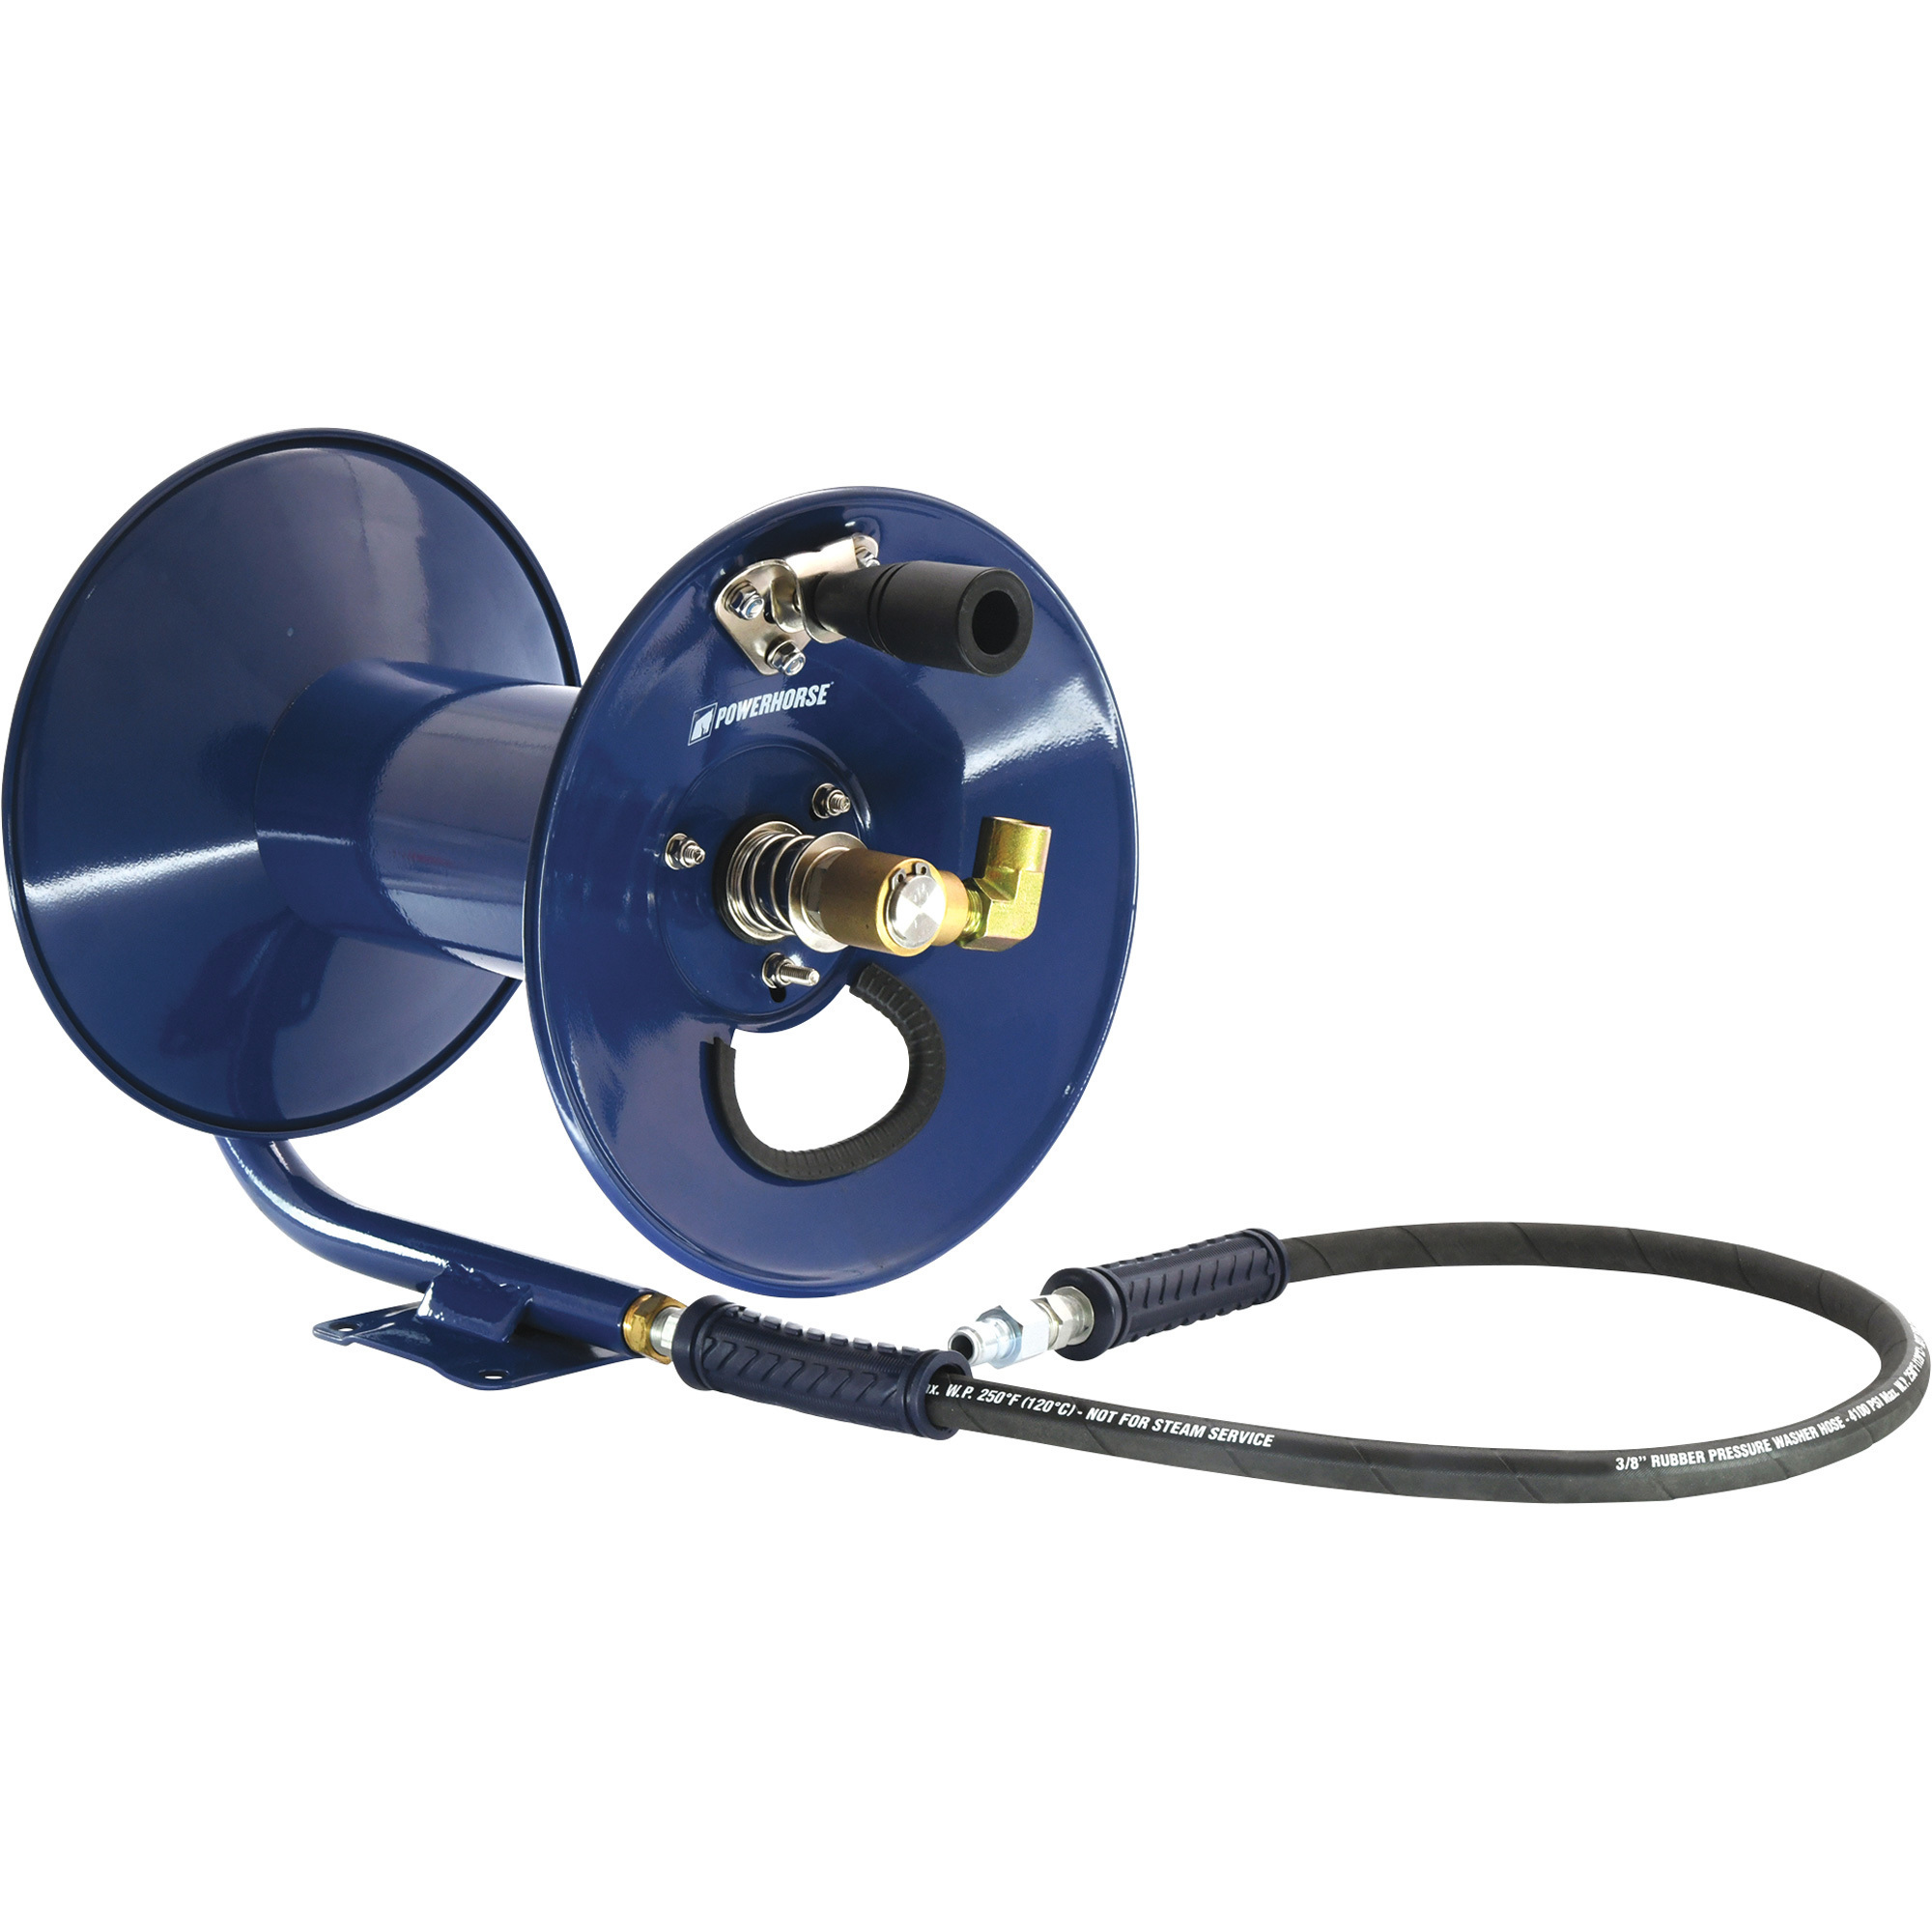 Powerhorse Pressure Washer Hose Reel 4000 PSI 100ft. Capacity 55785 P-9 for  sale online